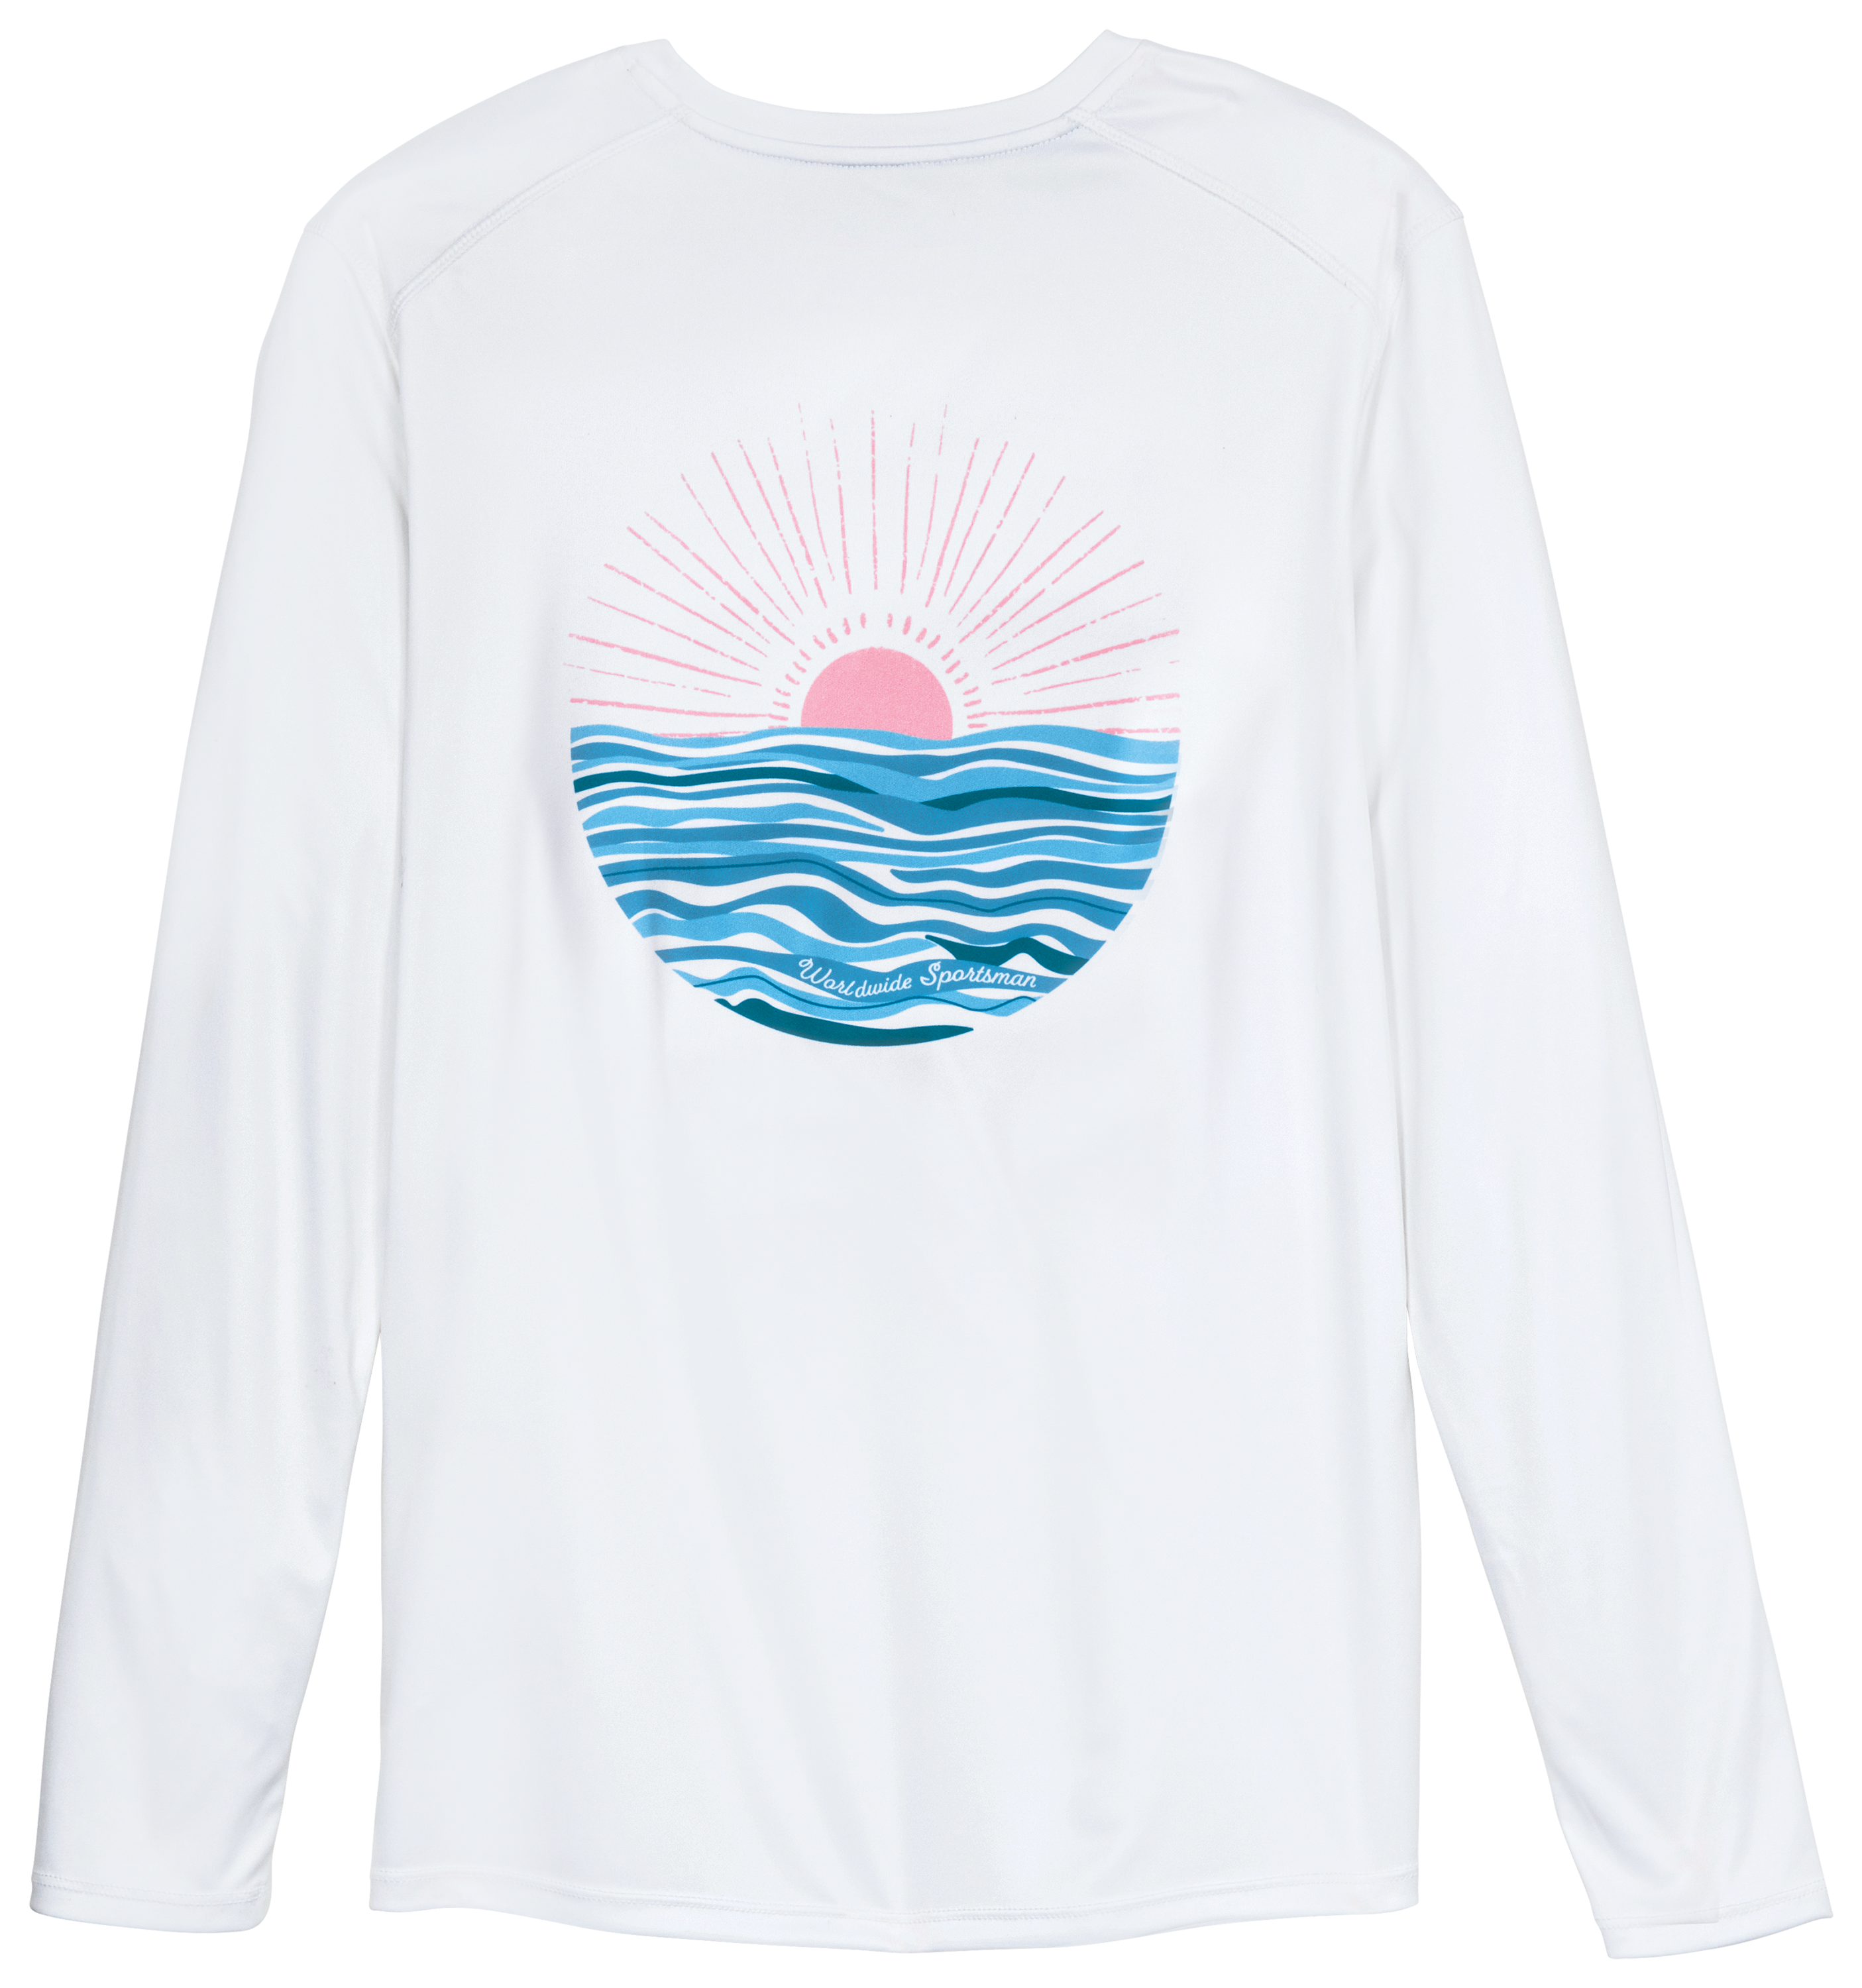 World Wide Sportsman Angler Sunny Seas Graphic Long-Sleeve Shirt for Ladies